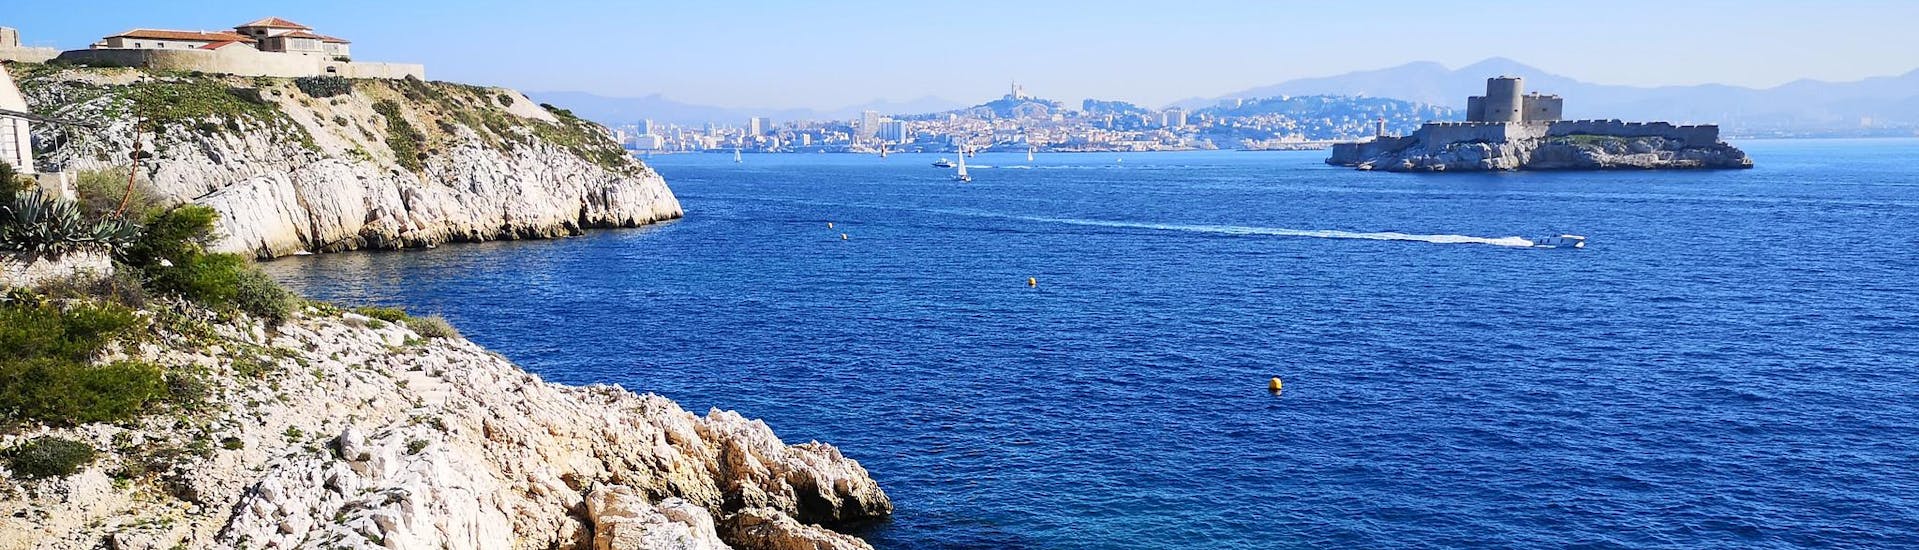 View of Marseille and Château d'If, seen from the Frioul archipelago, which is a popular destination for boat trips.